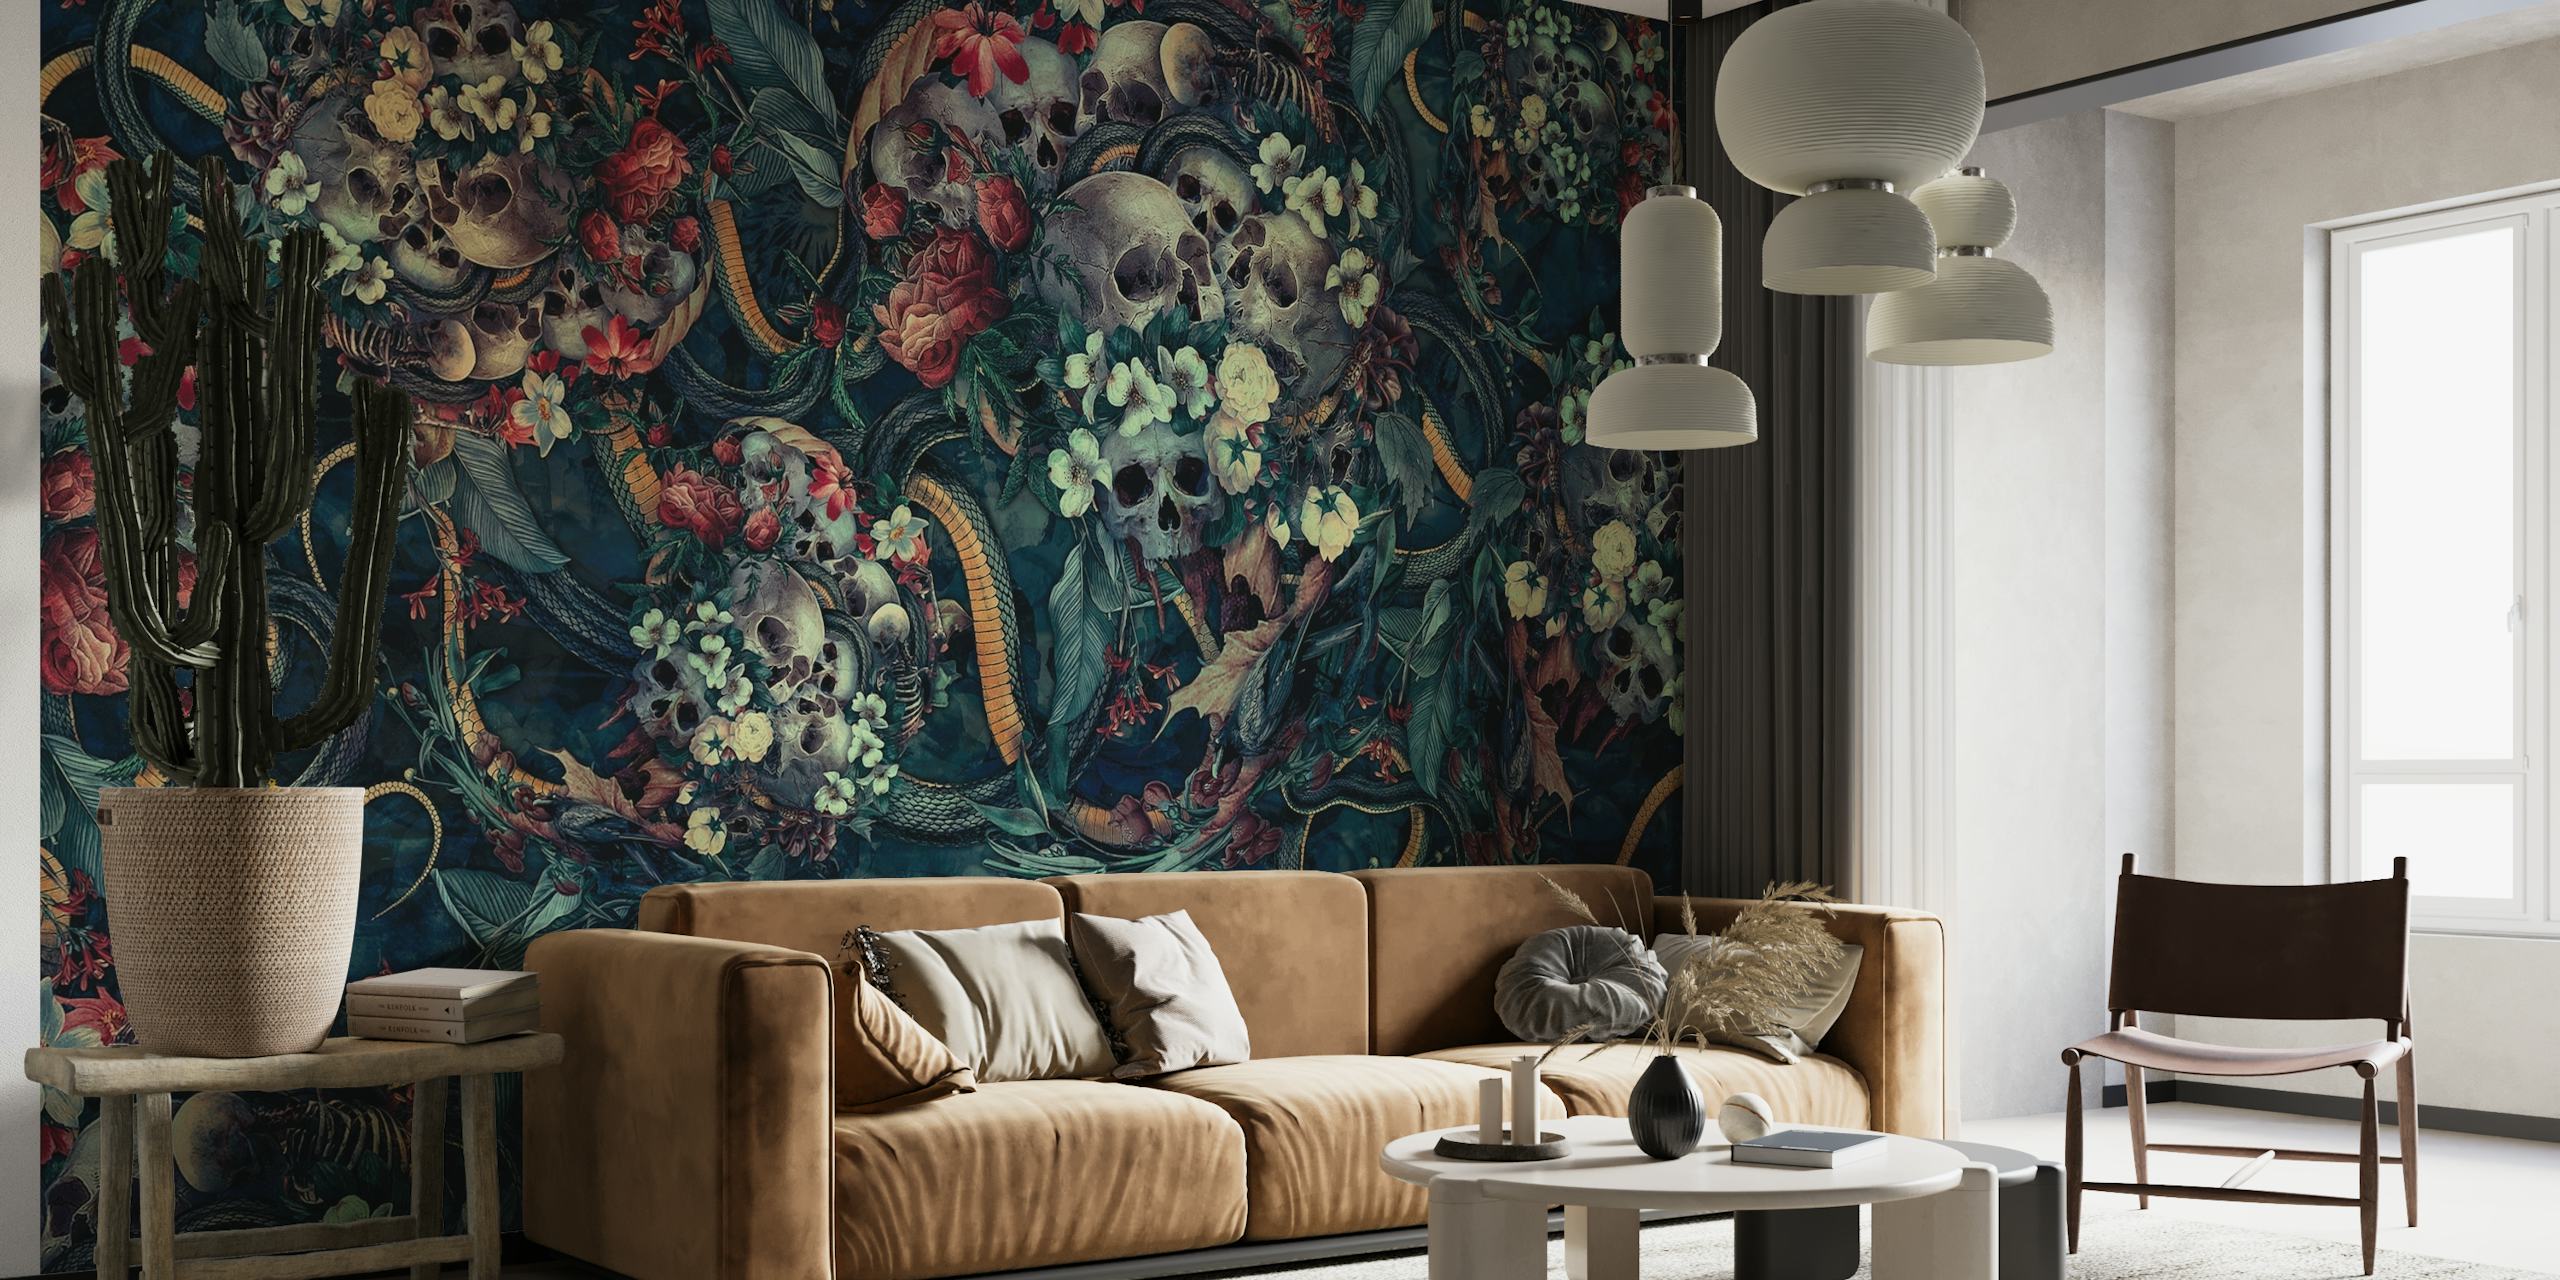 High-quality wall mural featuring a unique, stylish skull and snake design